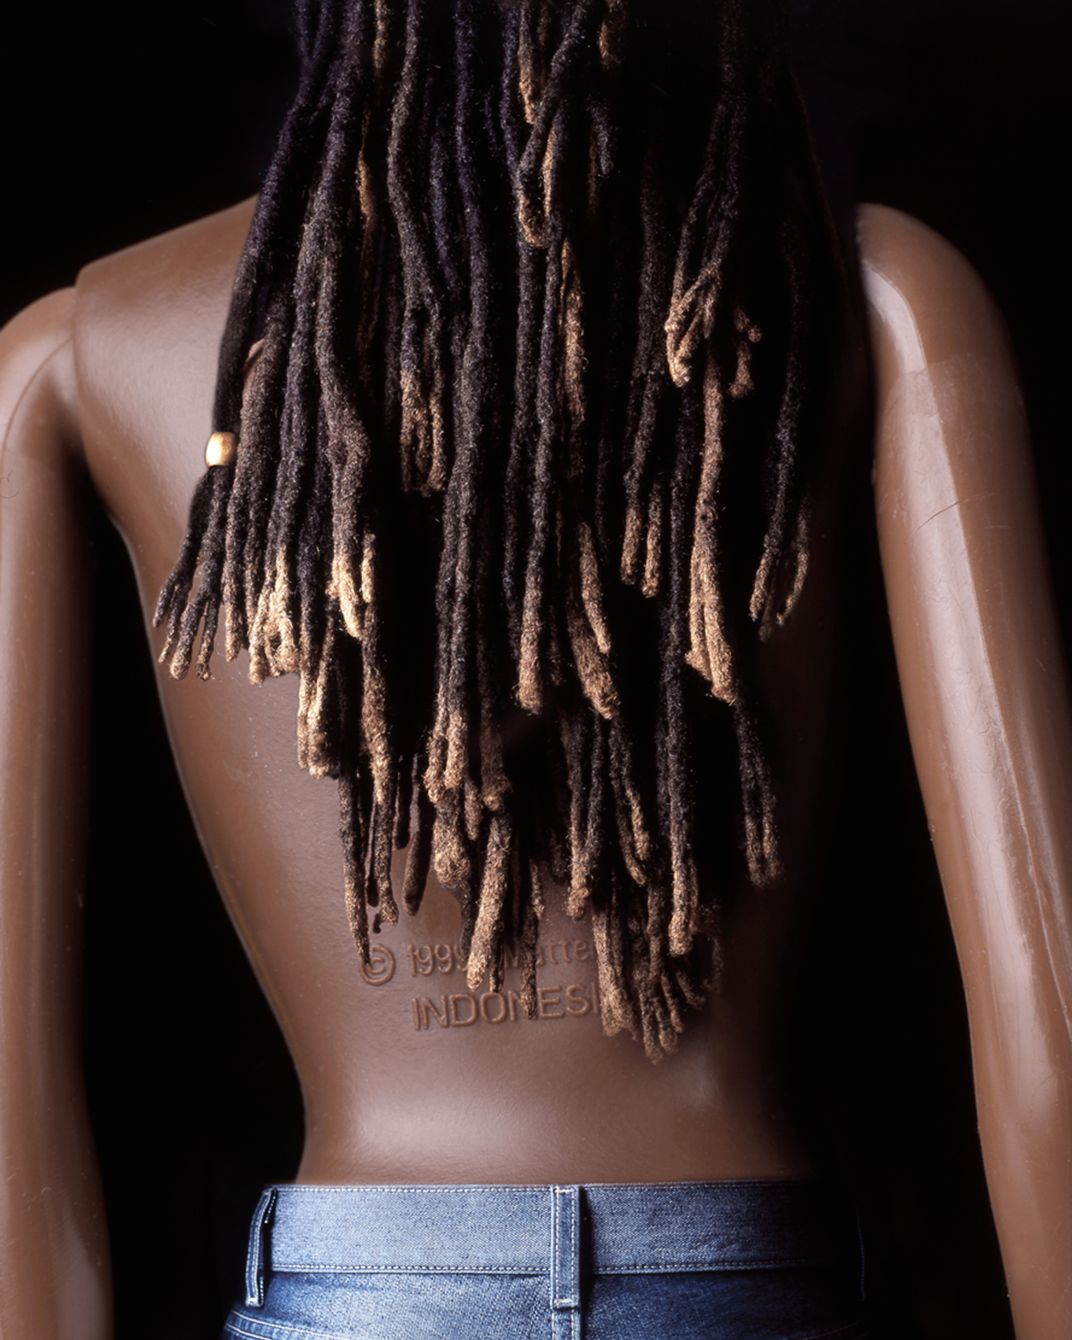 a Black toy barbie blended with the real hair of women in a photo illustration